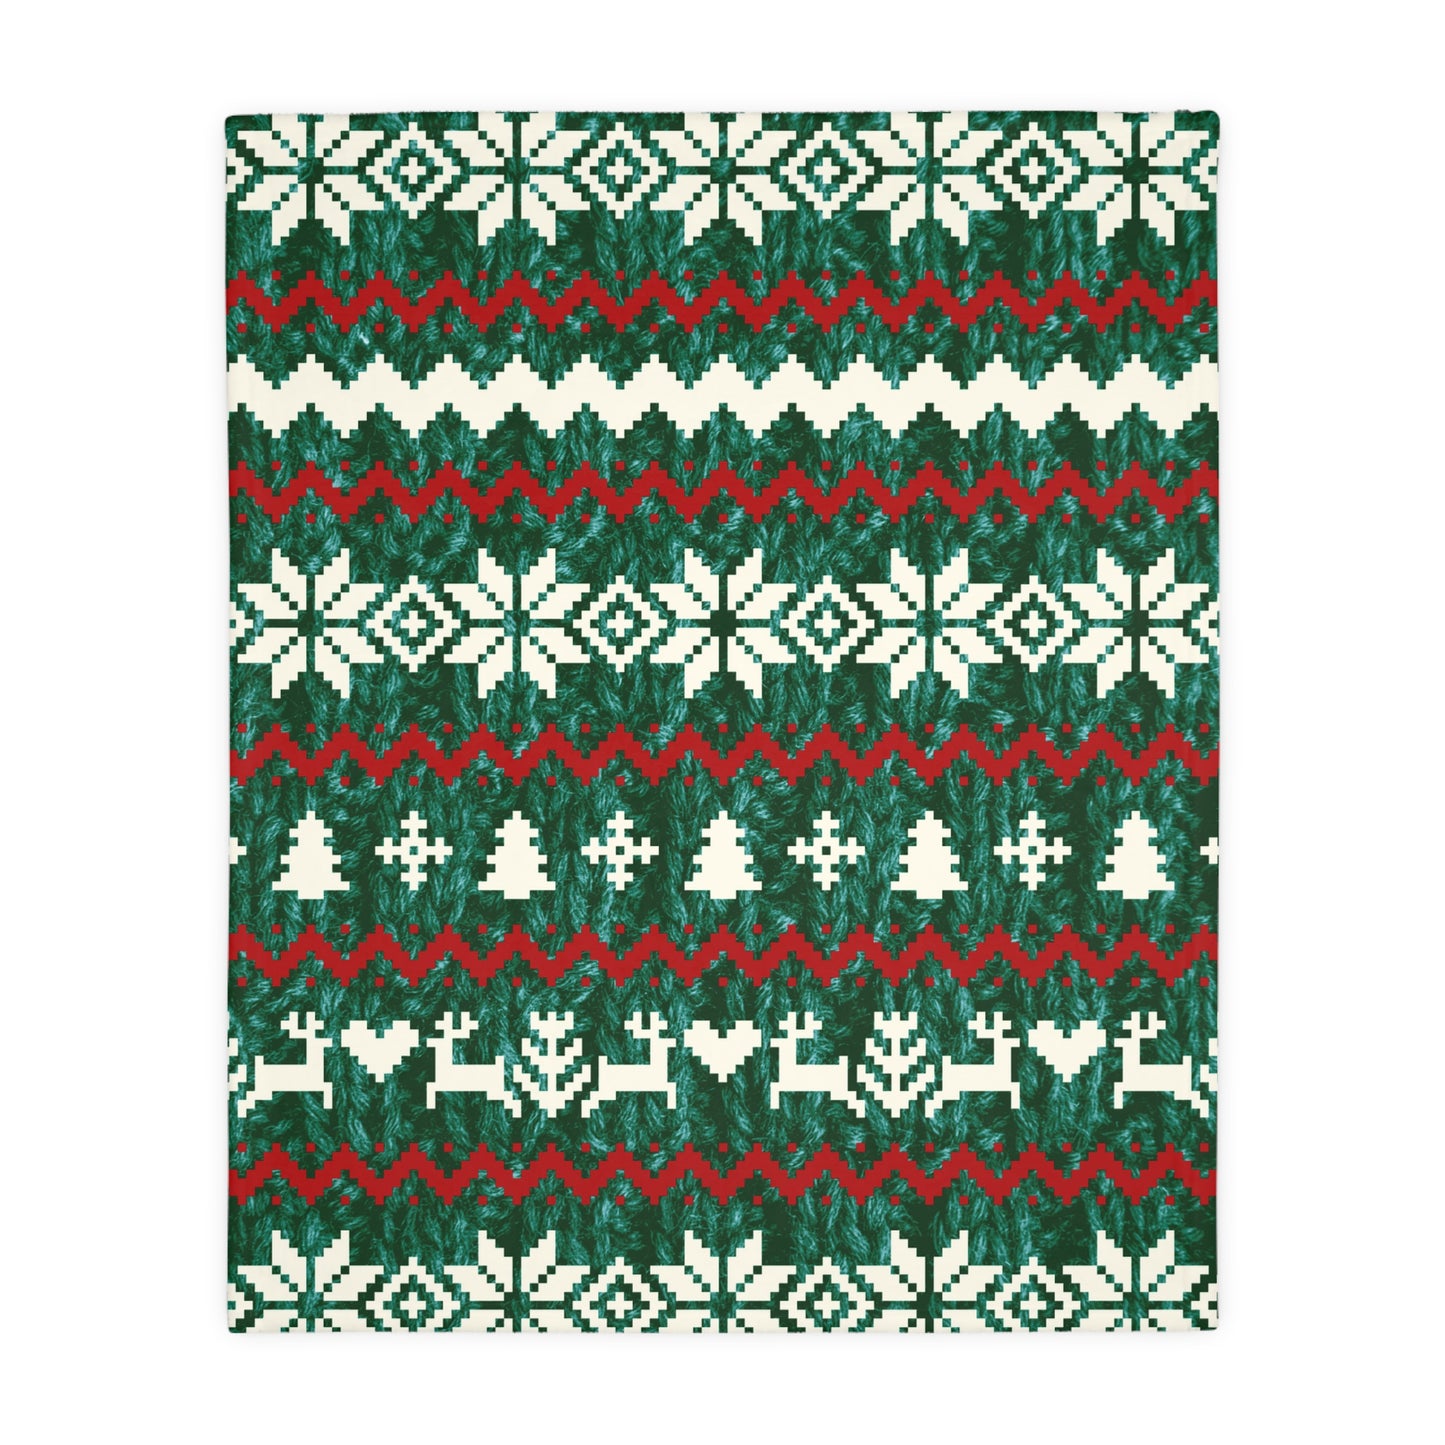 Santa's Sweater & Cup of Cheer - Velveteen Blanket (Two-sided print)